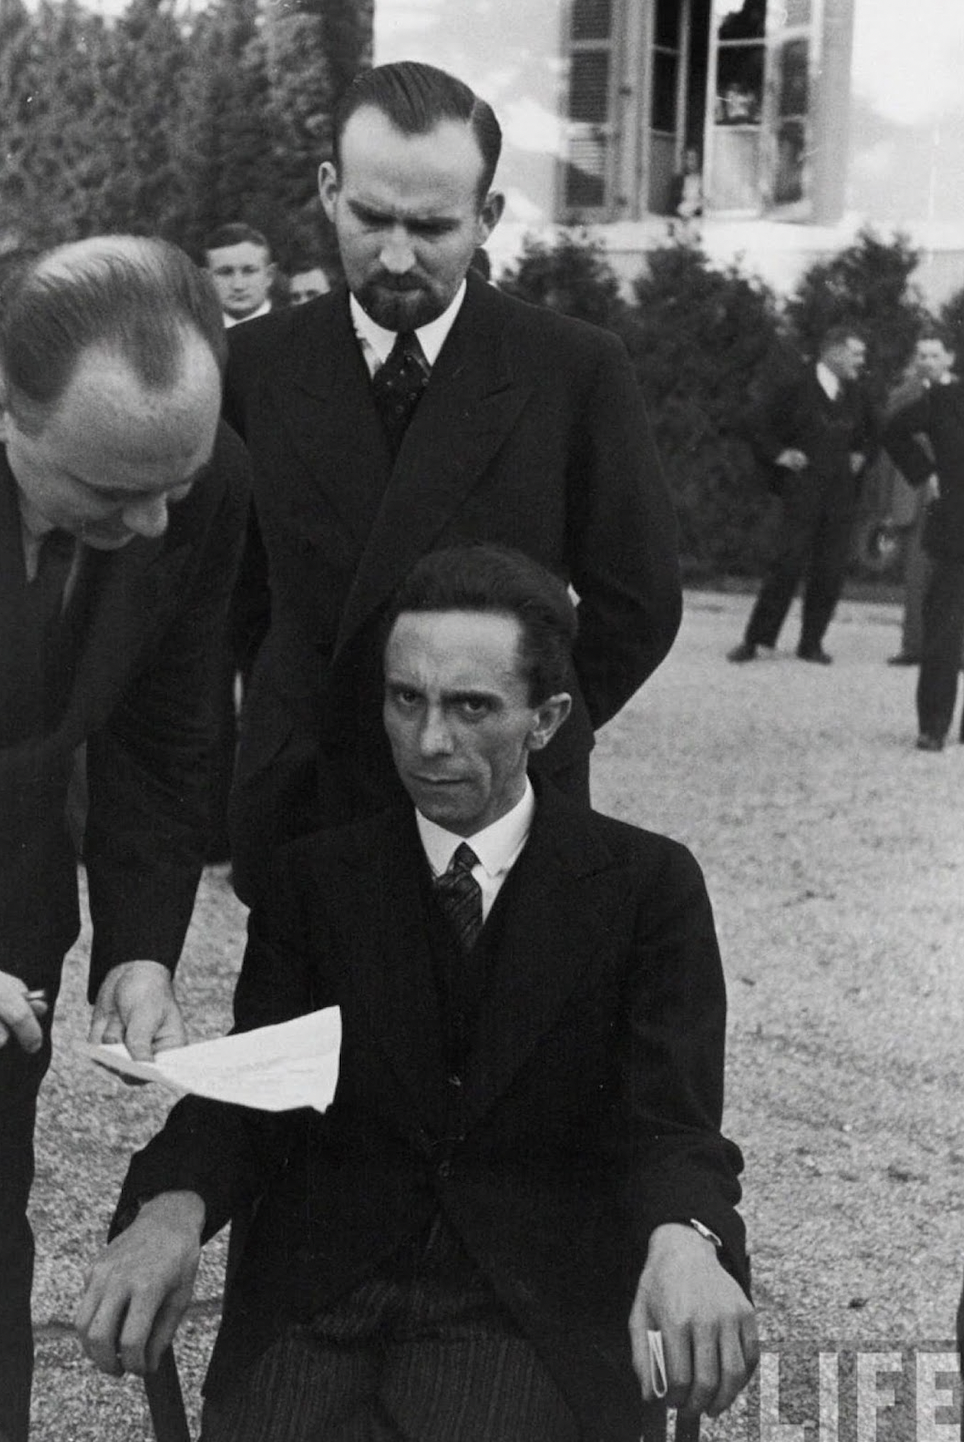 “Eyes of Hate,” a candid photograph of Goebbels after he finds out his photographer was Jewish, 1933. “He looked up at me with an expression full of hate. The result, however, was a much stronger photograph.” 